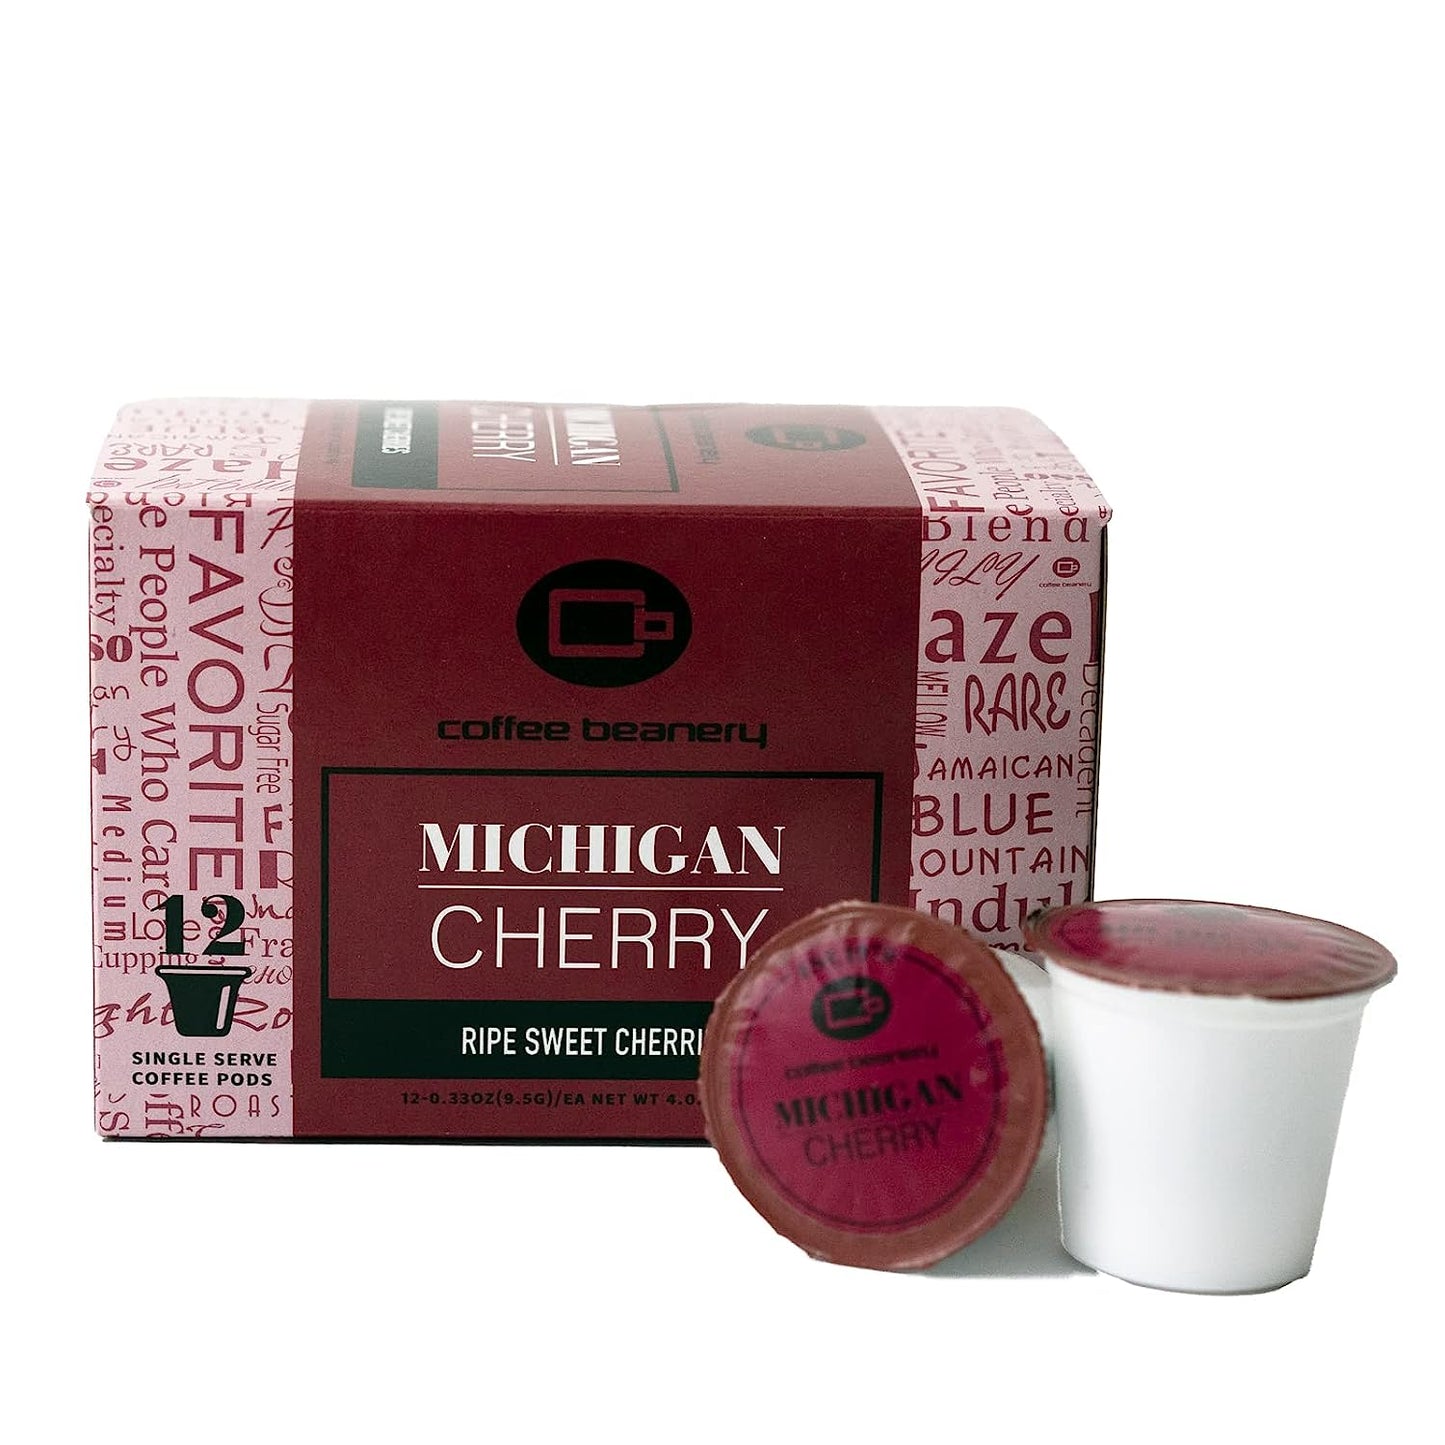 Michigan Cherry Single Serve Coffee Pods | 12ct | 100% Specialty Arabica Coffee | Gourmet Flavored Coffee